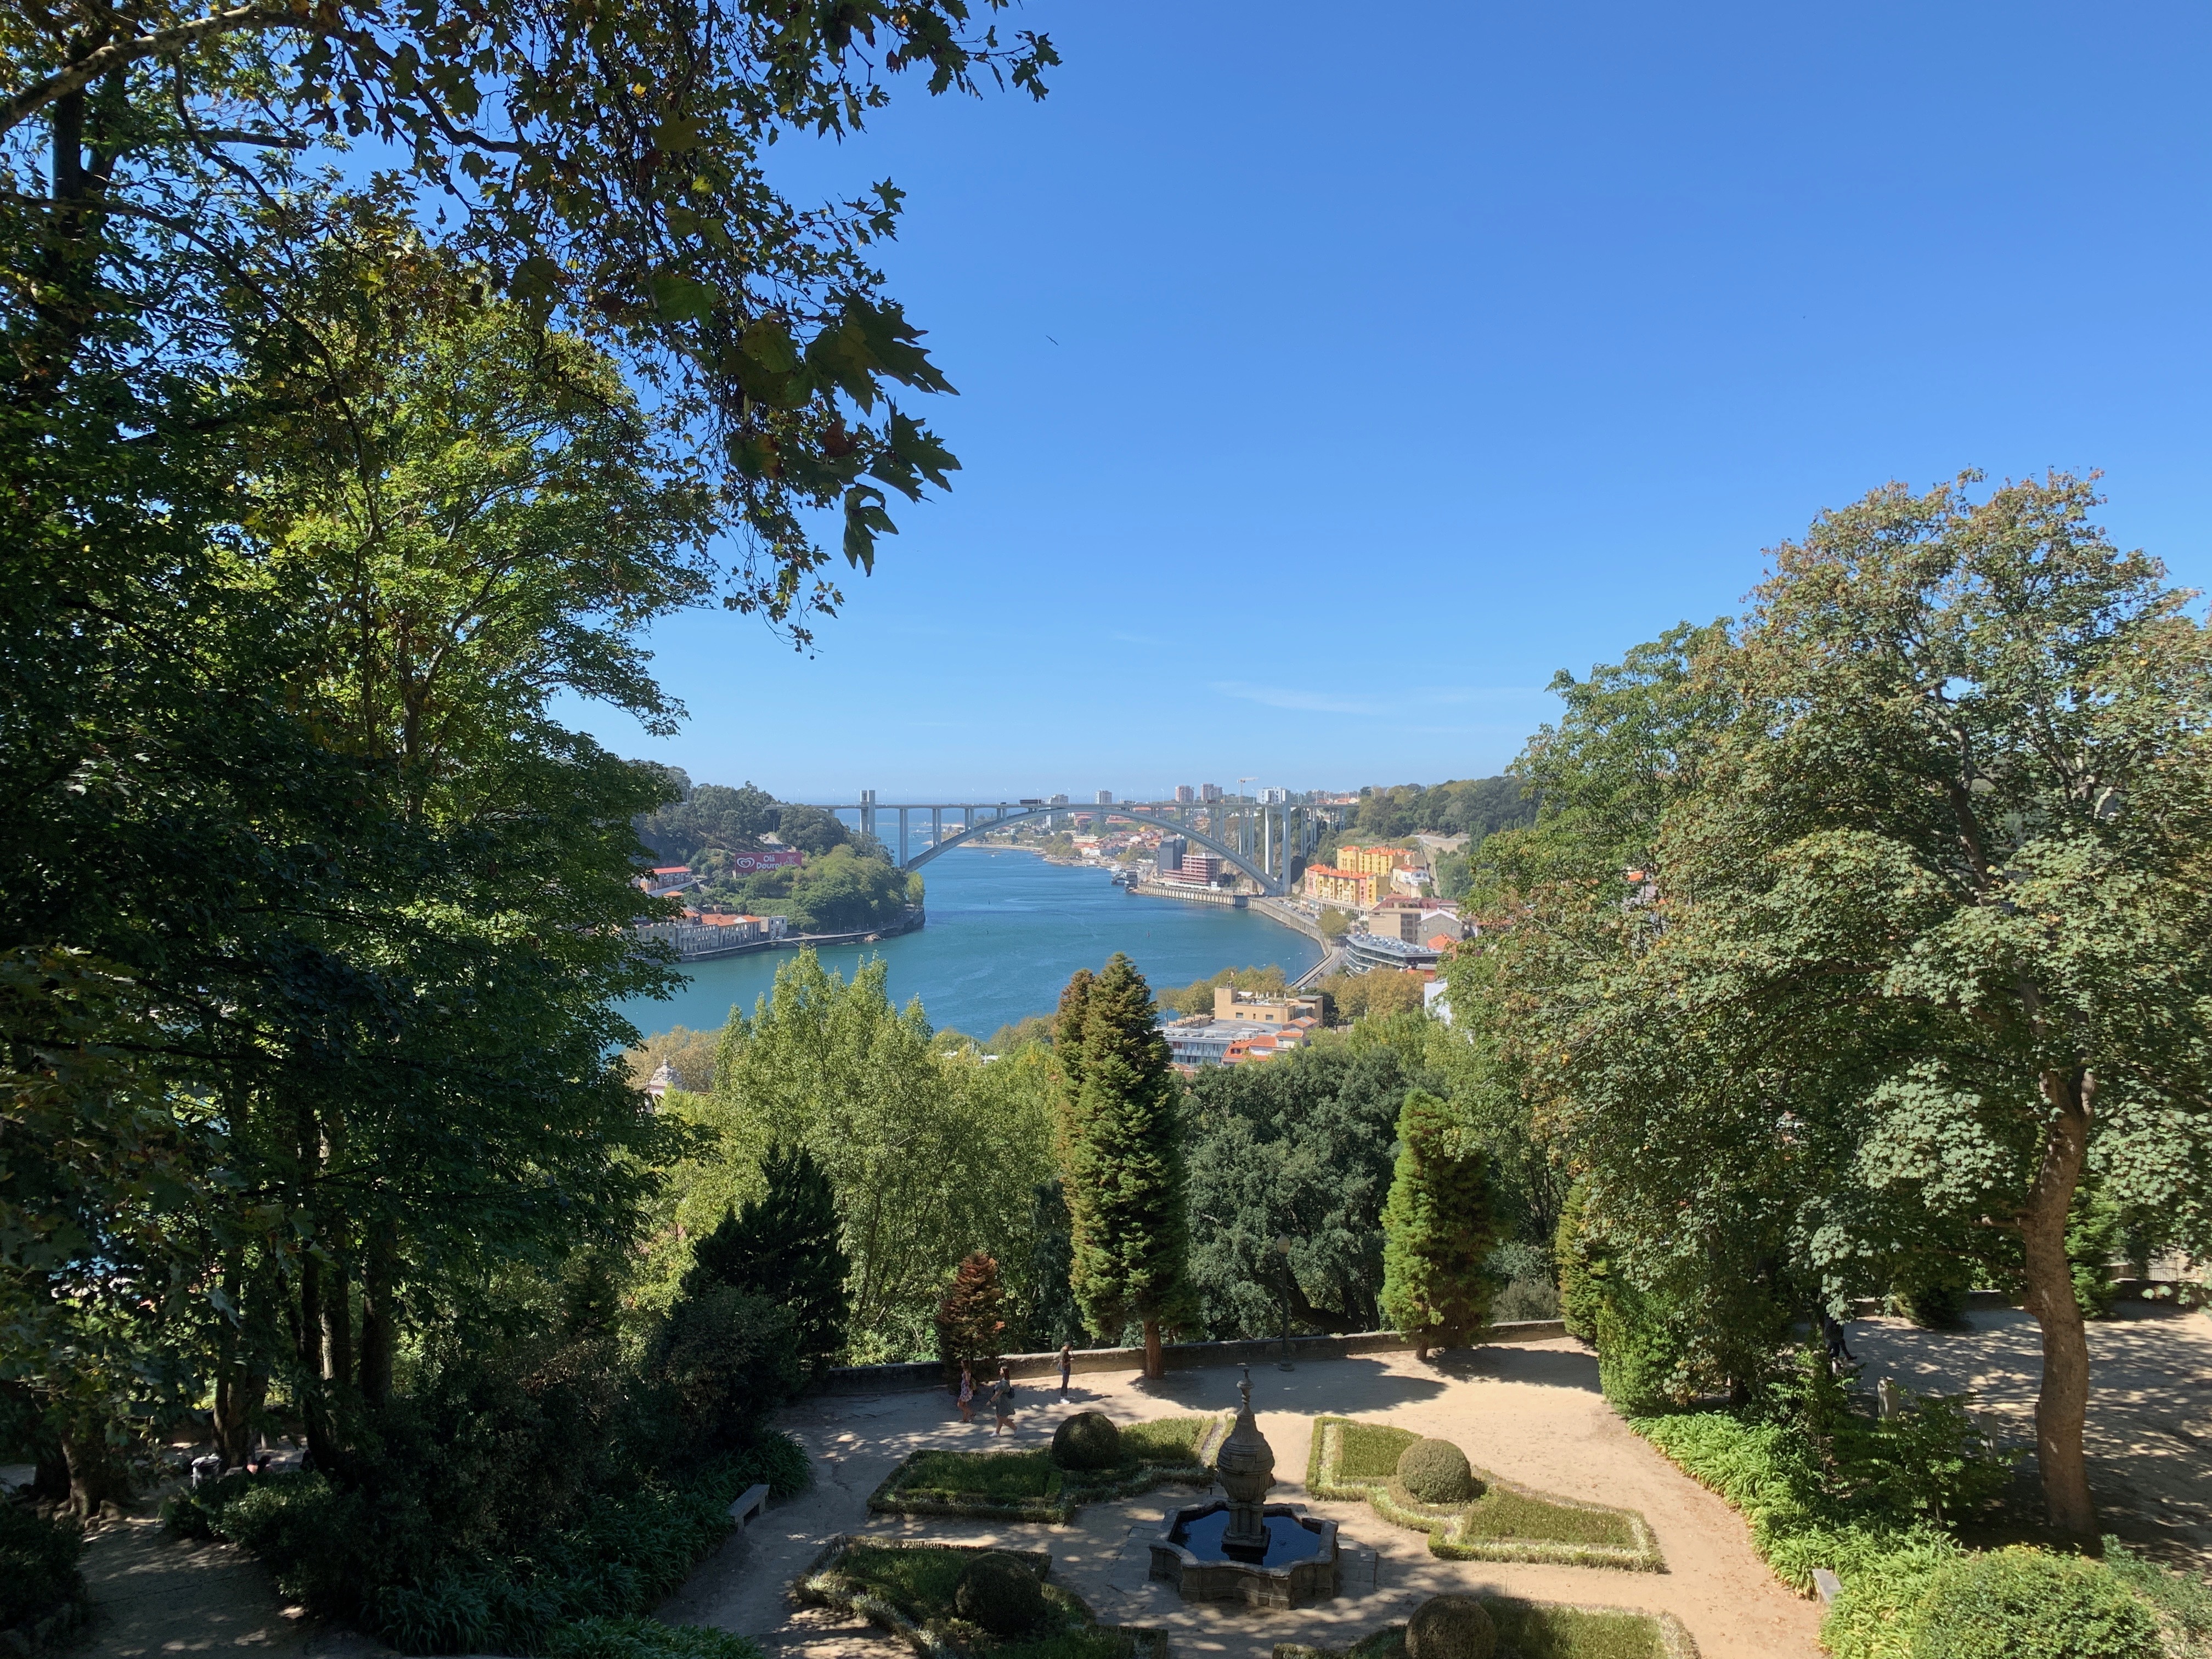 View of the Douro river from the Crystal Palace Gardens